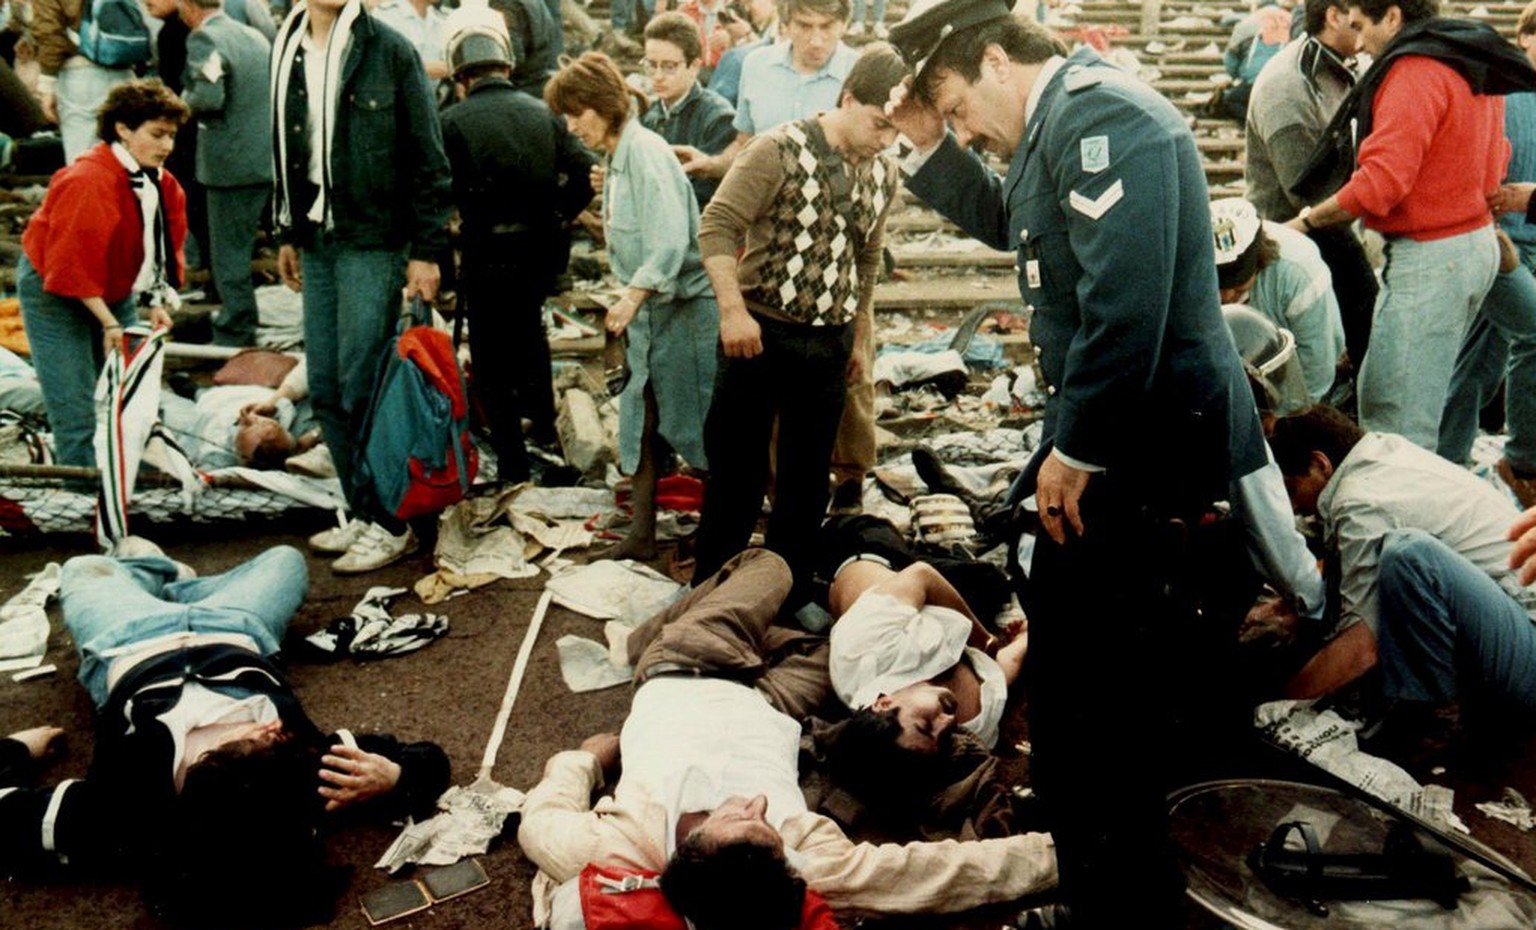 Photo dated 29 May 1985 shows injured spectators in the Heysel stadium in Brussels after violent clashes between Juventus Turin and Liverpool fans prior to the European Champions Cup final. The Heysel ...